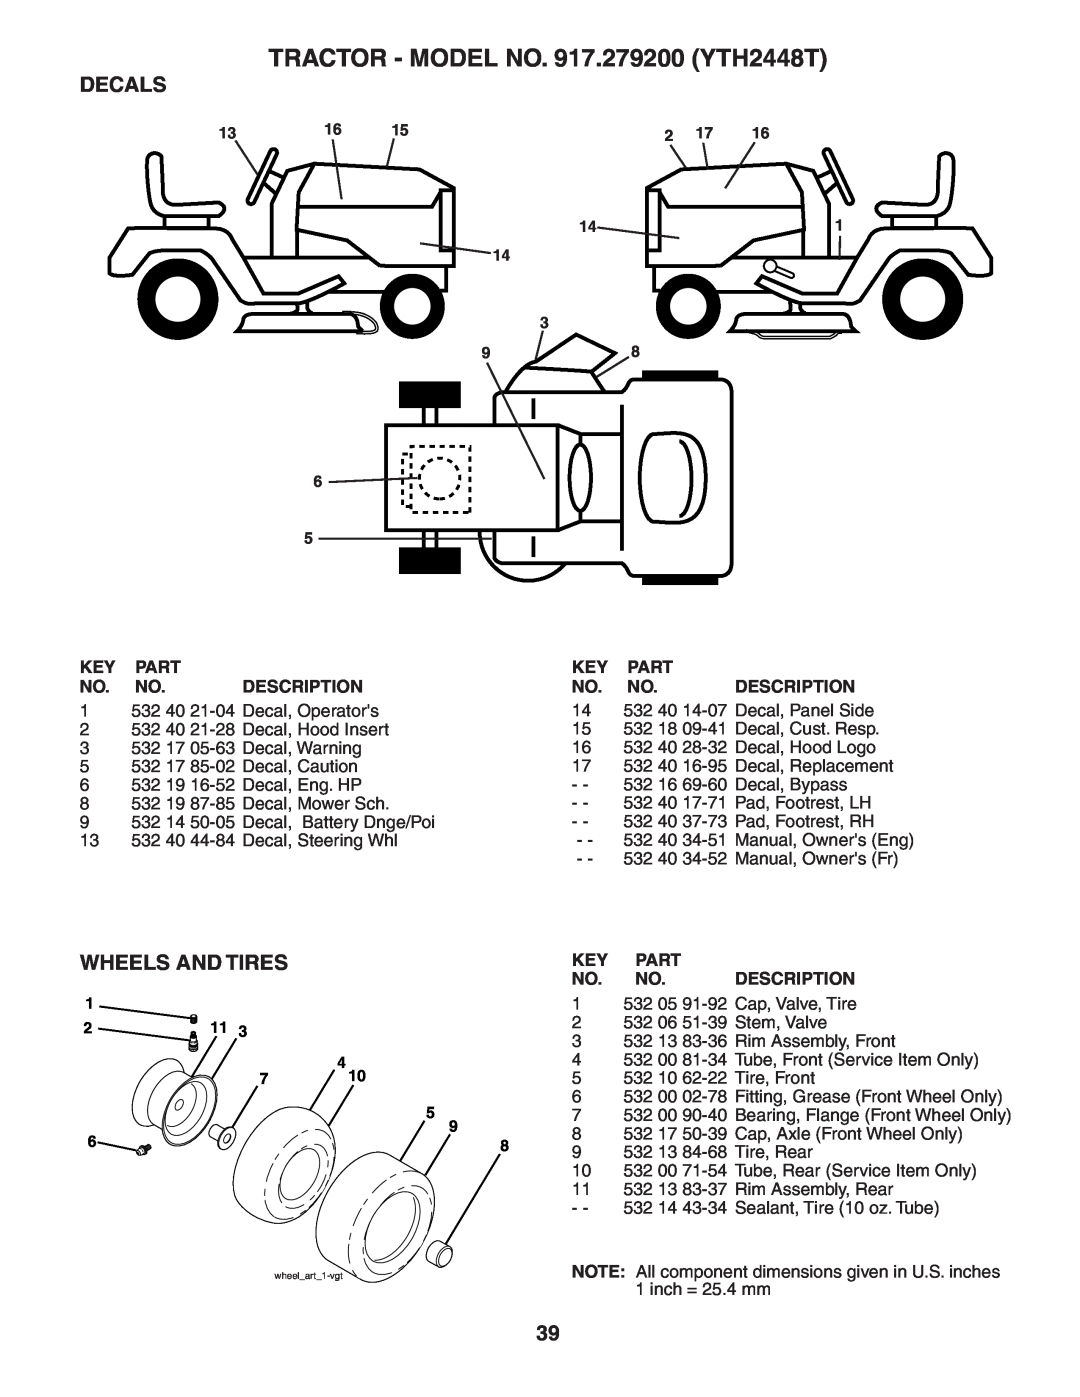 Husqvarna owner manual Decals, Wheels And Tires, TRACTOR - MODEL NO. 917.279200 YTH2448T, wheelart1-vgt 